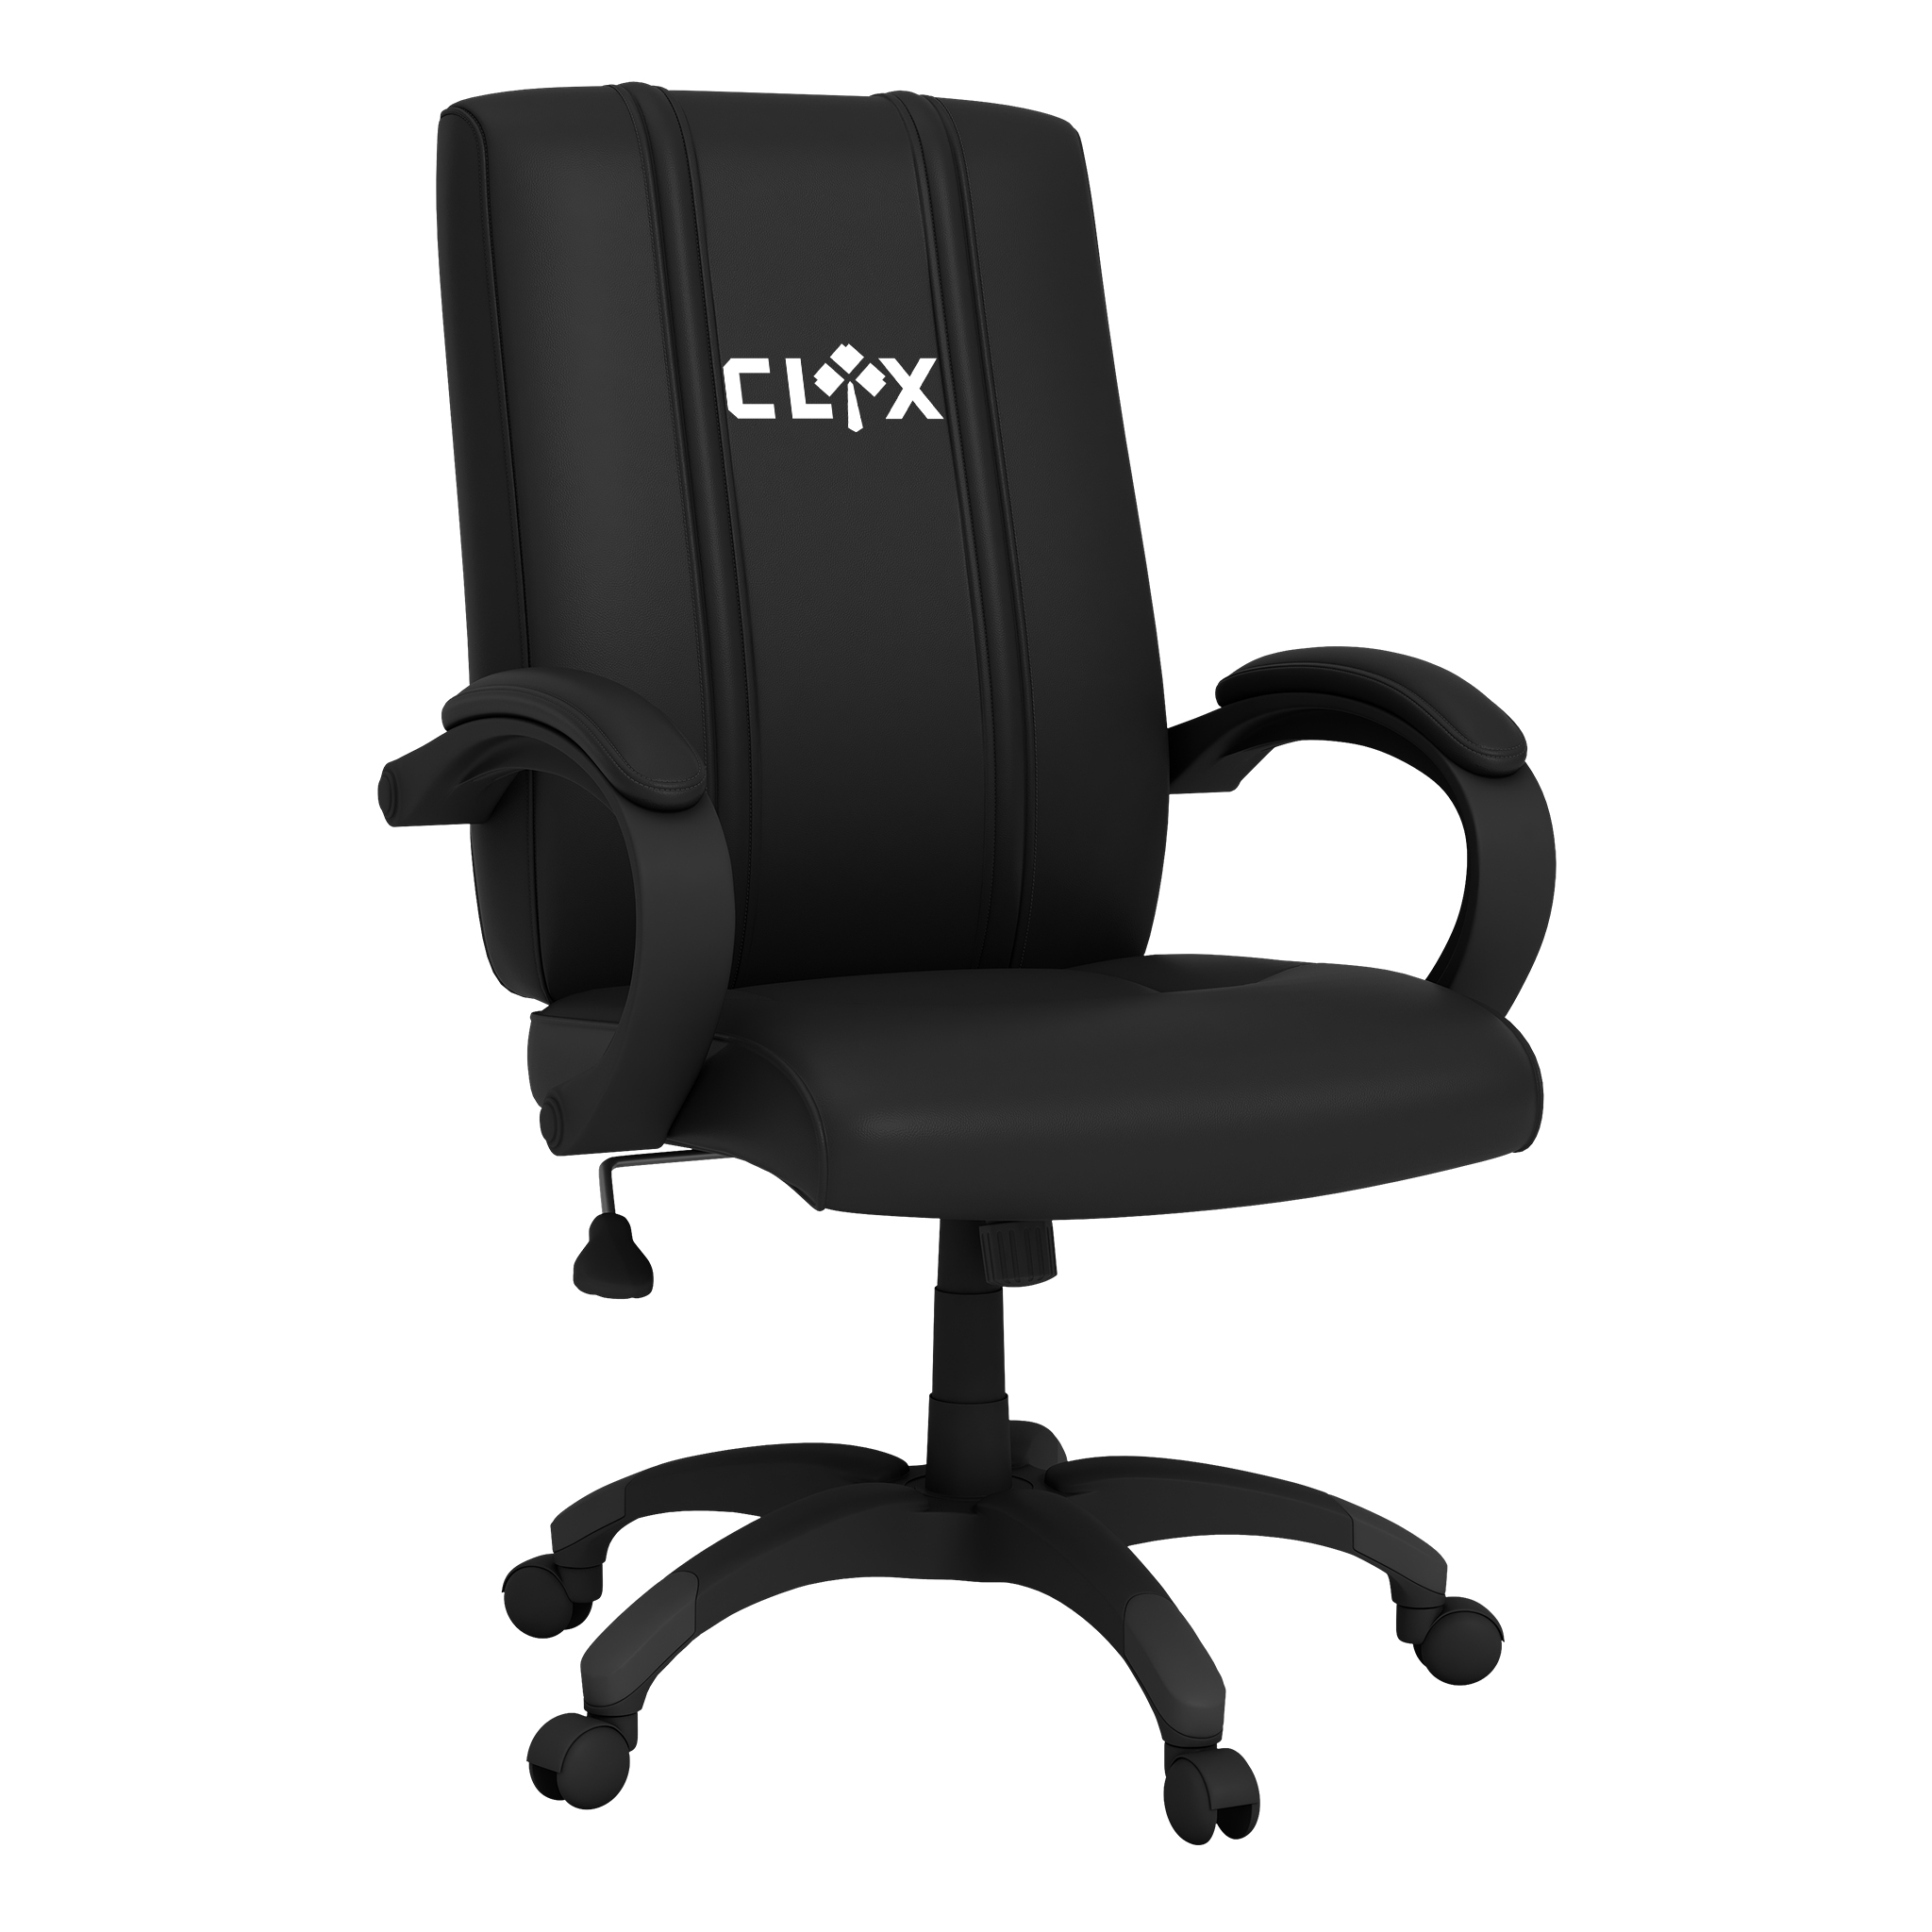 Boston Celtics Office Chair 1000 with Celtics Crossover Gaming Wordmark White